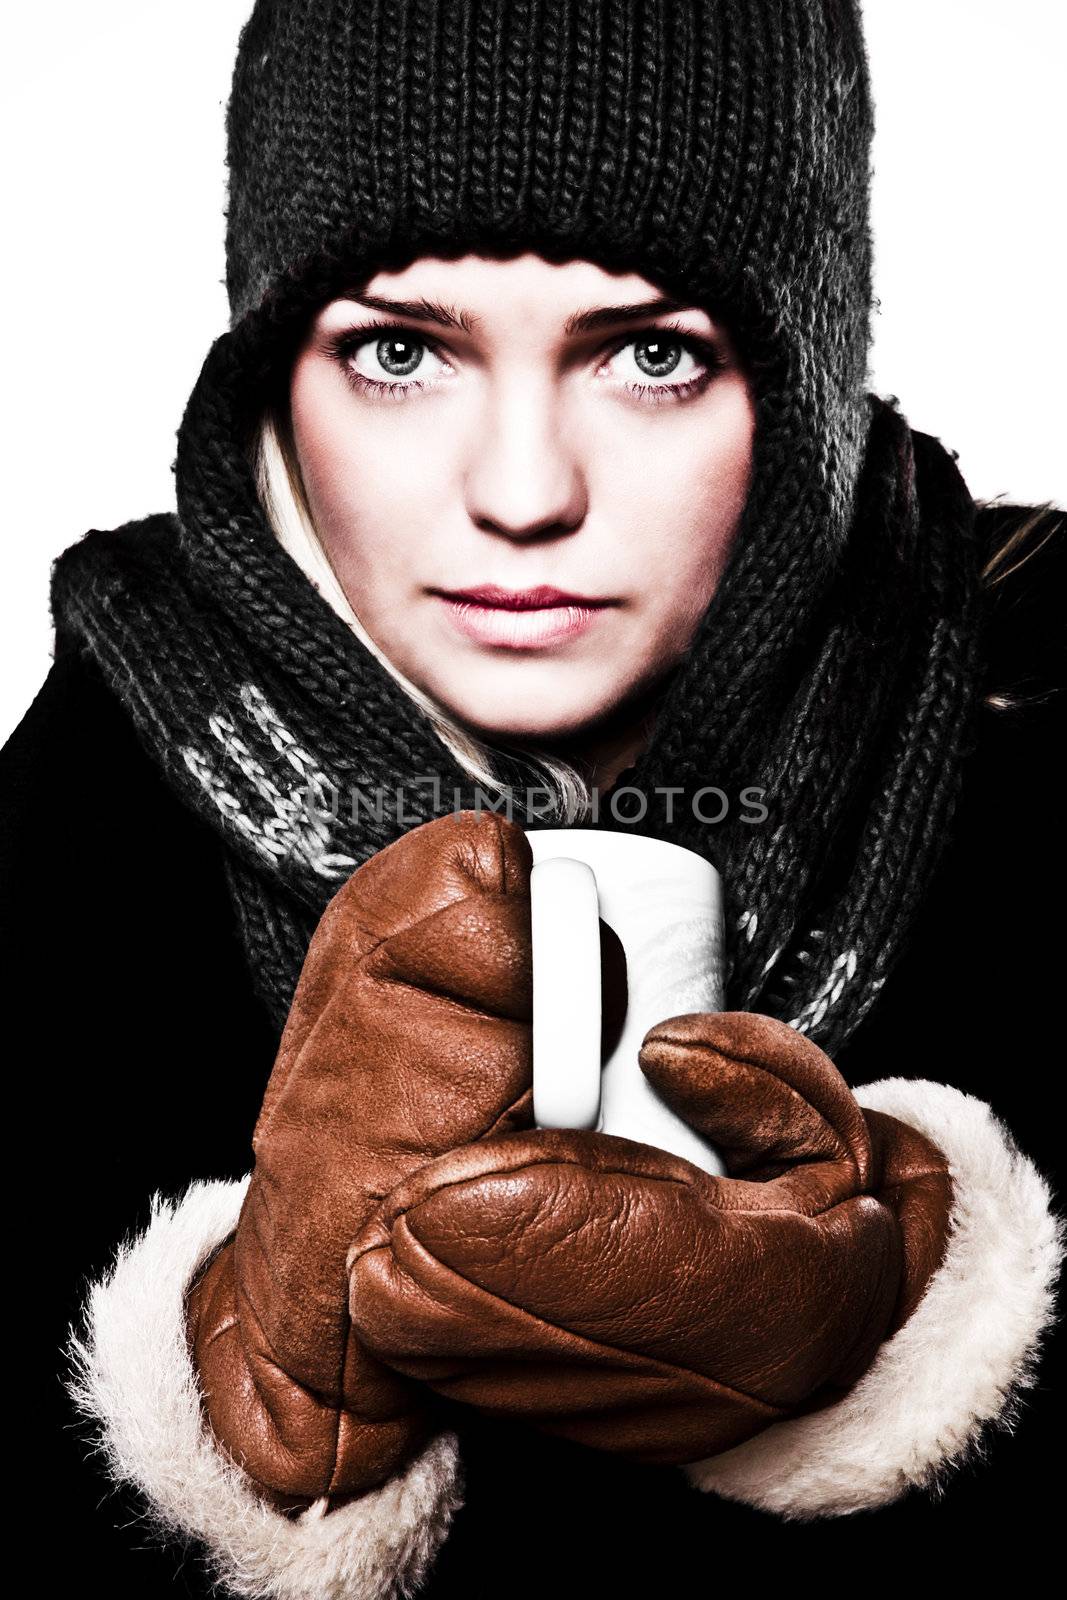 Cute Girl Having A Hot Drink In A Freezing Winter Day